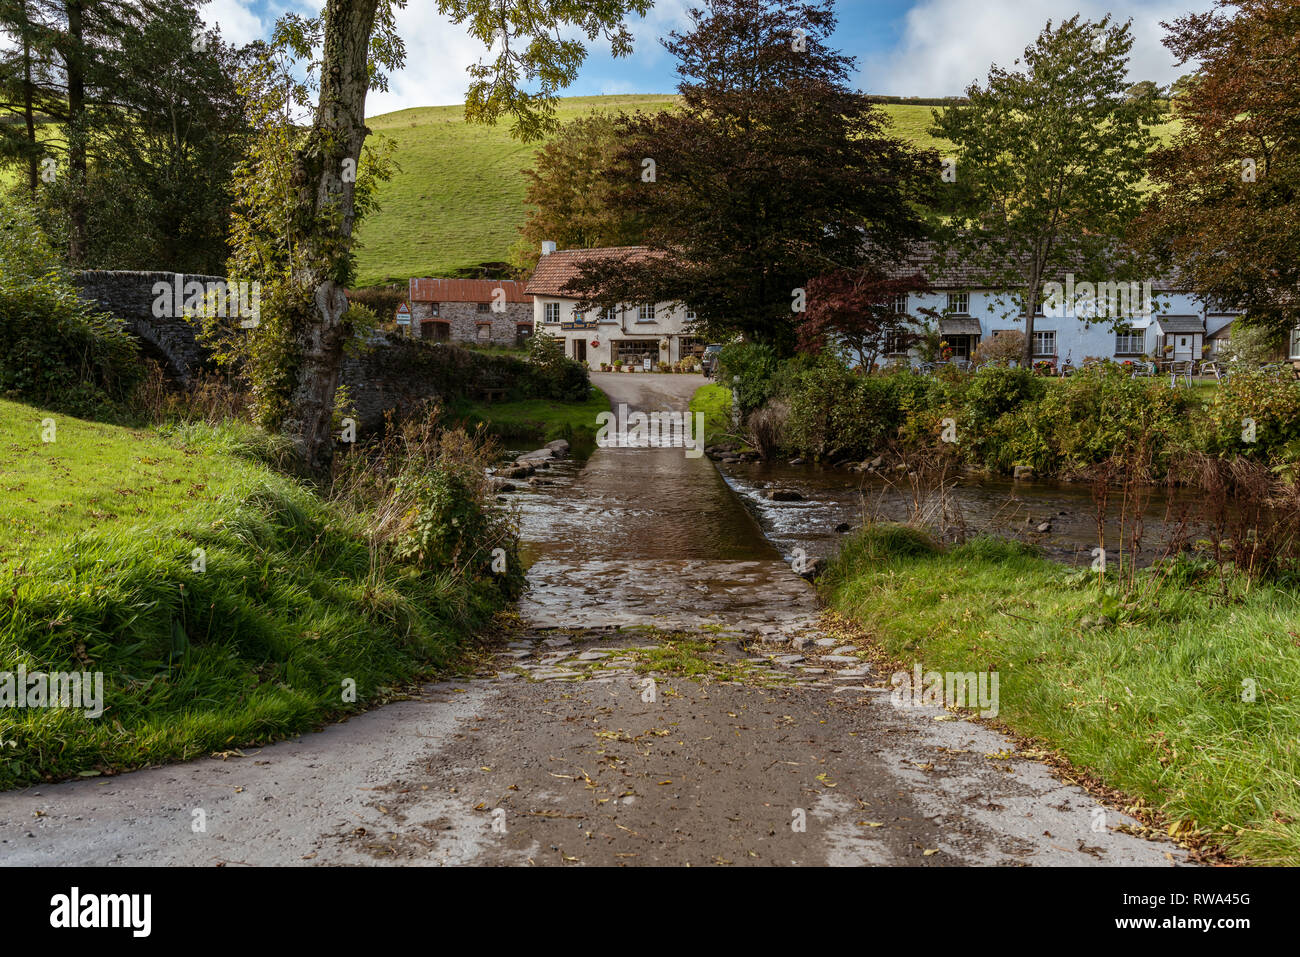 Malmsmead, Devon, England, UK - October 03, 2018: The ford crossing Badgworthy Water Stock Photo